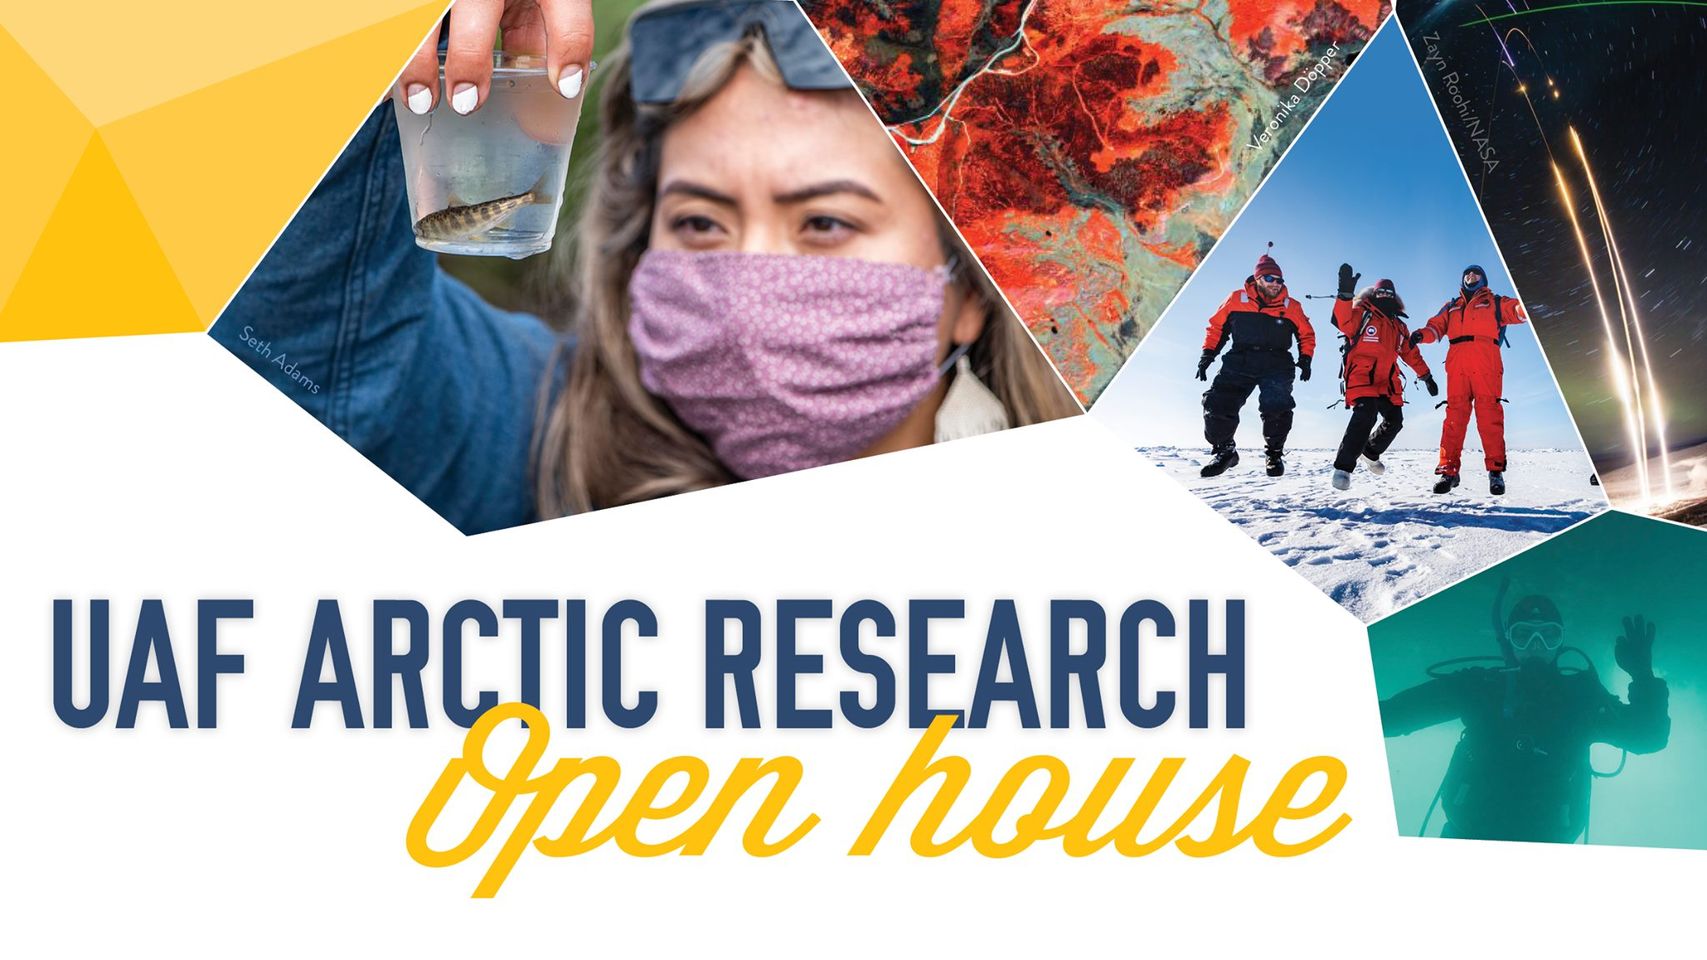 Join Us for the Arctic Research Open House on May 20!